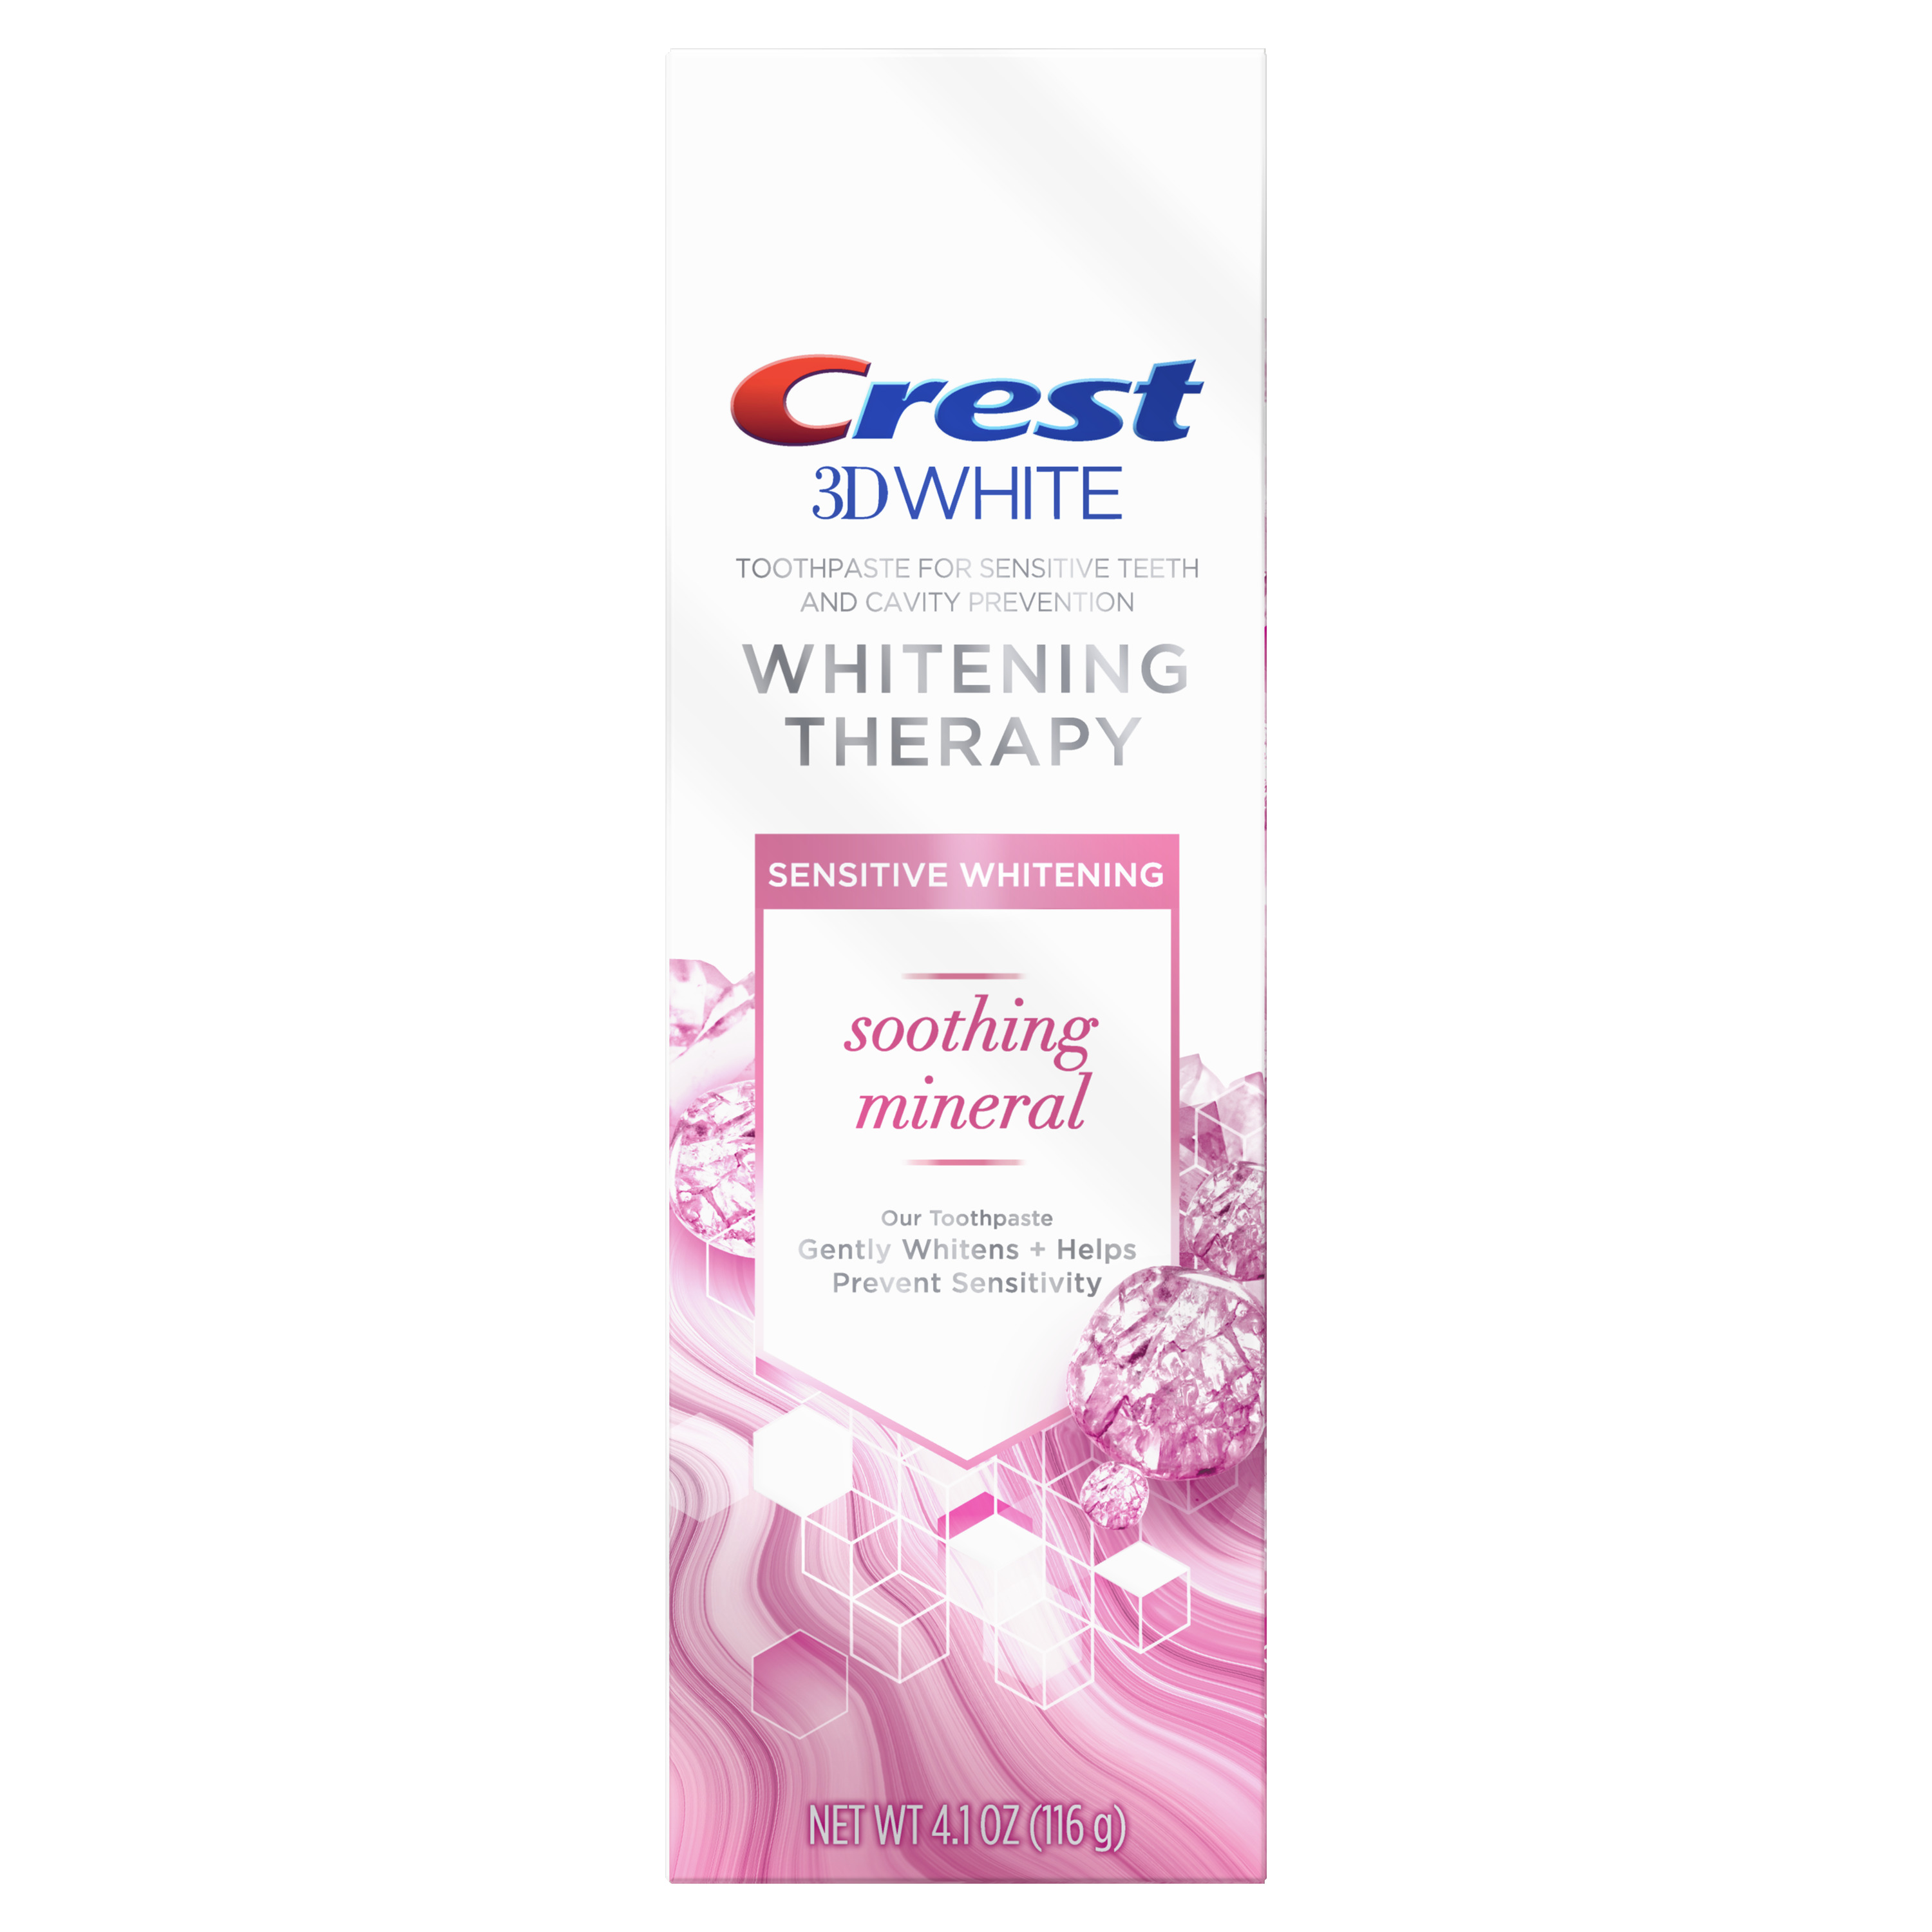 Crest 3D White Whitening Therapy Sensitivity Care Toothpaste, 4.1 oz - image 2 of 8